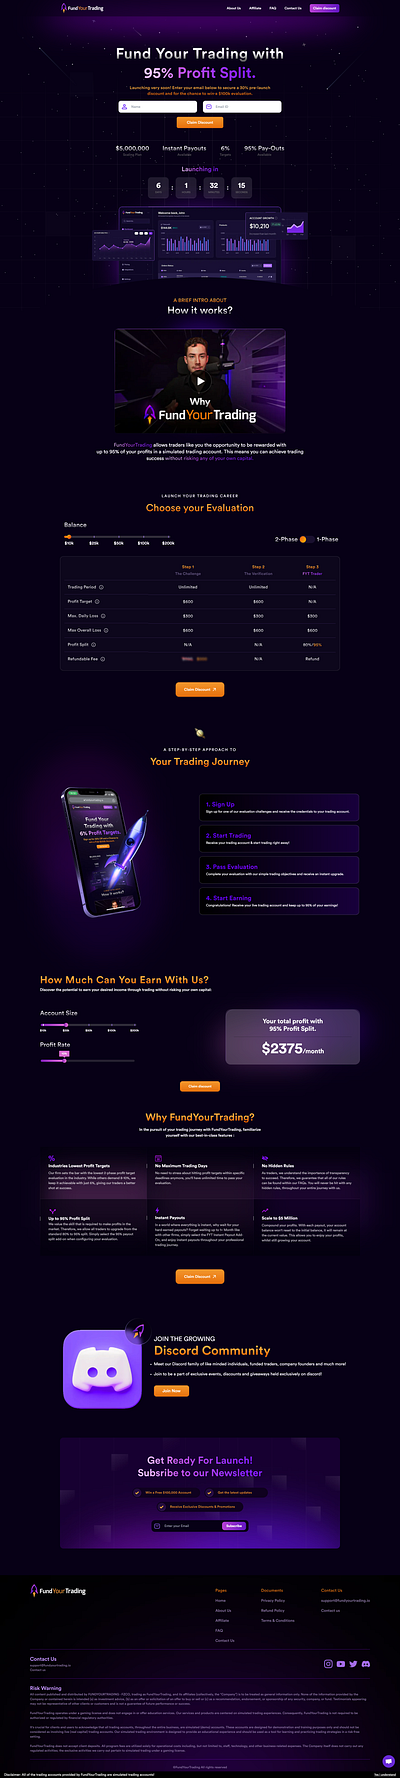 Complete Prop Firm | FundYourTrading.io challenge crypto design development figma firm forex funded funded accounts graphic design landing page layout prop prop firm prop firms trading ui uiux ux